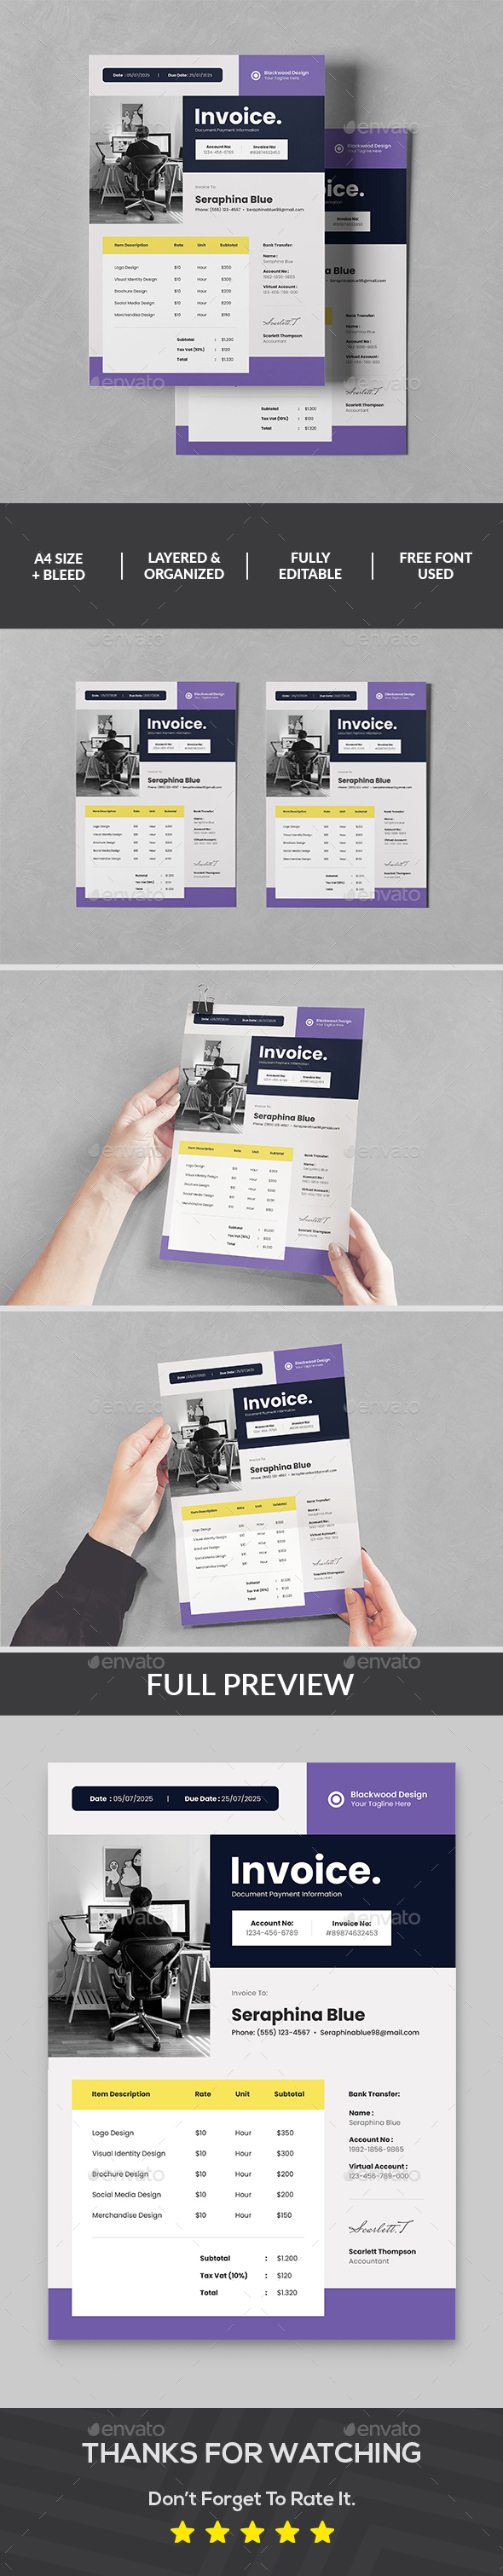 [DOWNLOAD]Invoice Templates